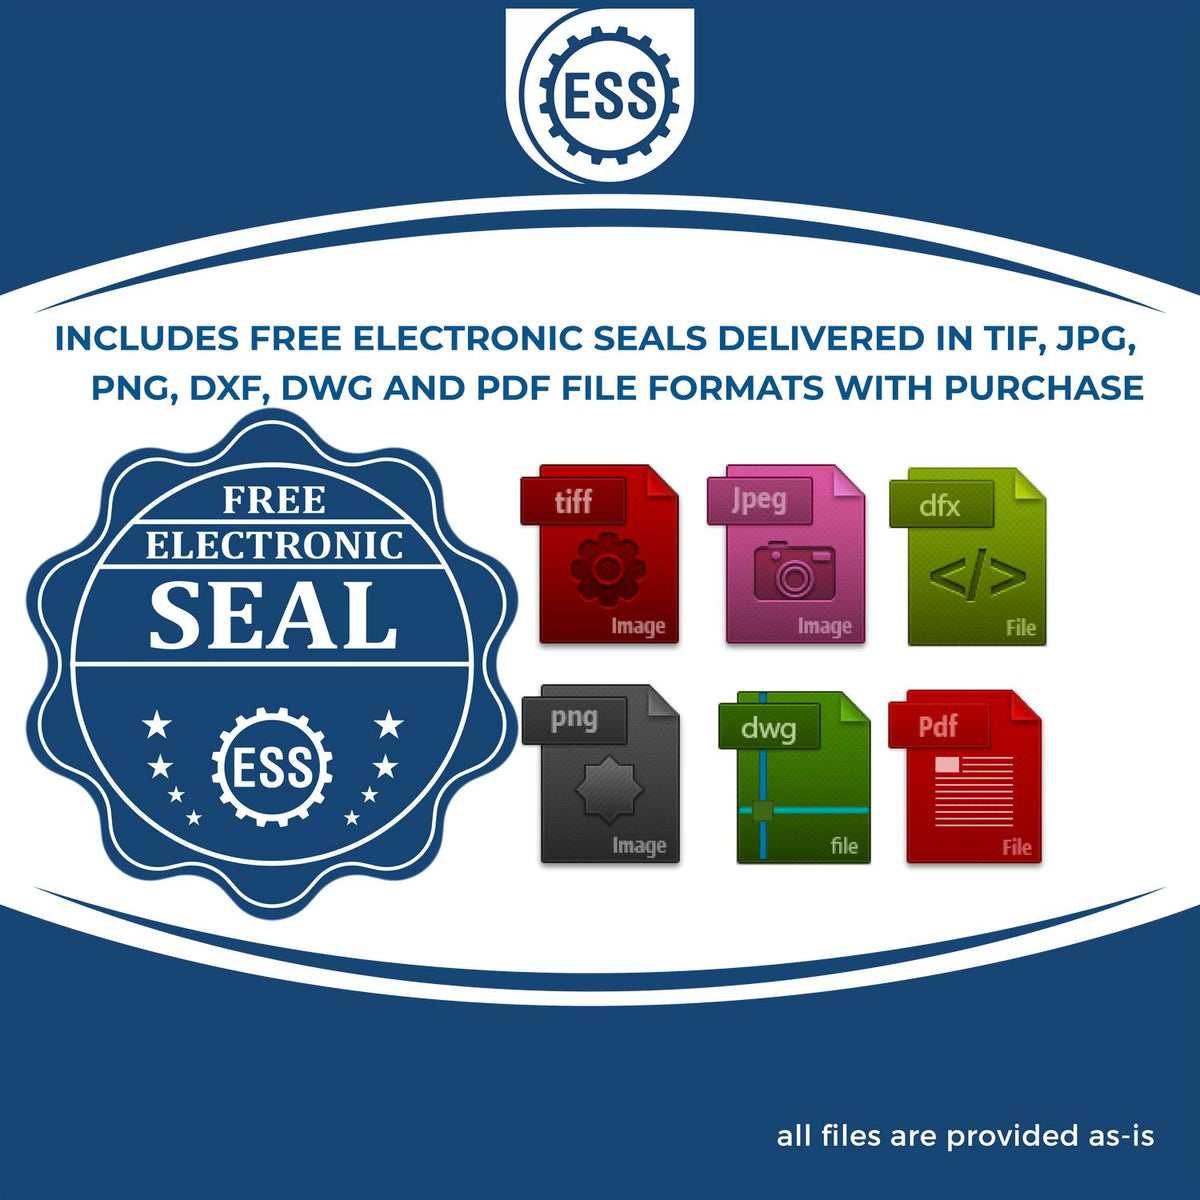 An infographic for the free electronic seal for the Slim Pre-Inked Massachusetts Professional Geologist Seal Stamp illustrating the different file type icons such as DXF, DWG, TIF, JPG and PNG.